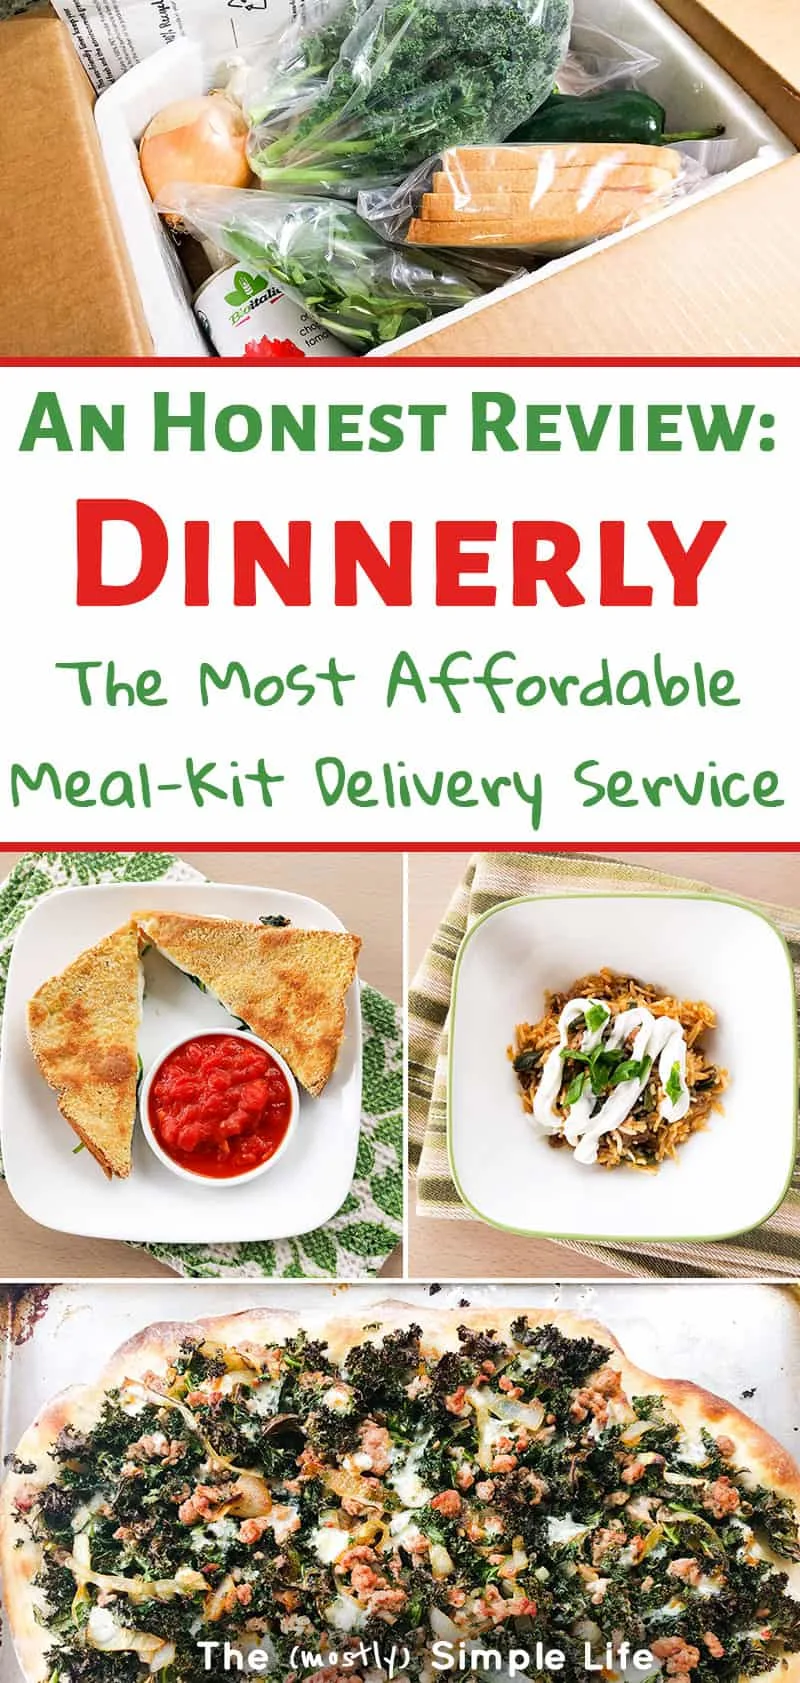 My Honest Review of Dinnerly (the most affordable meal-kit delivery service)